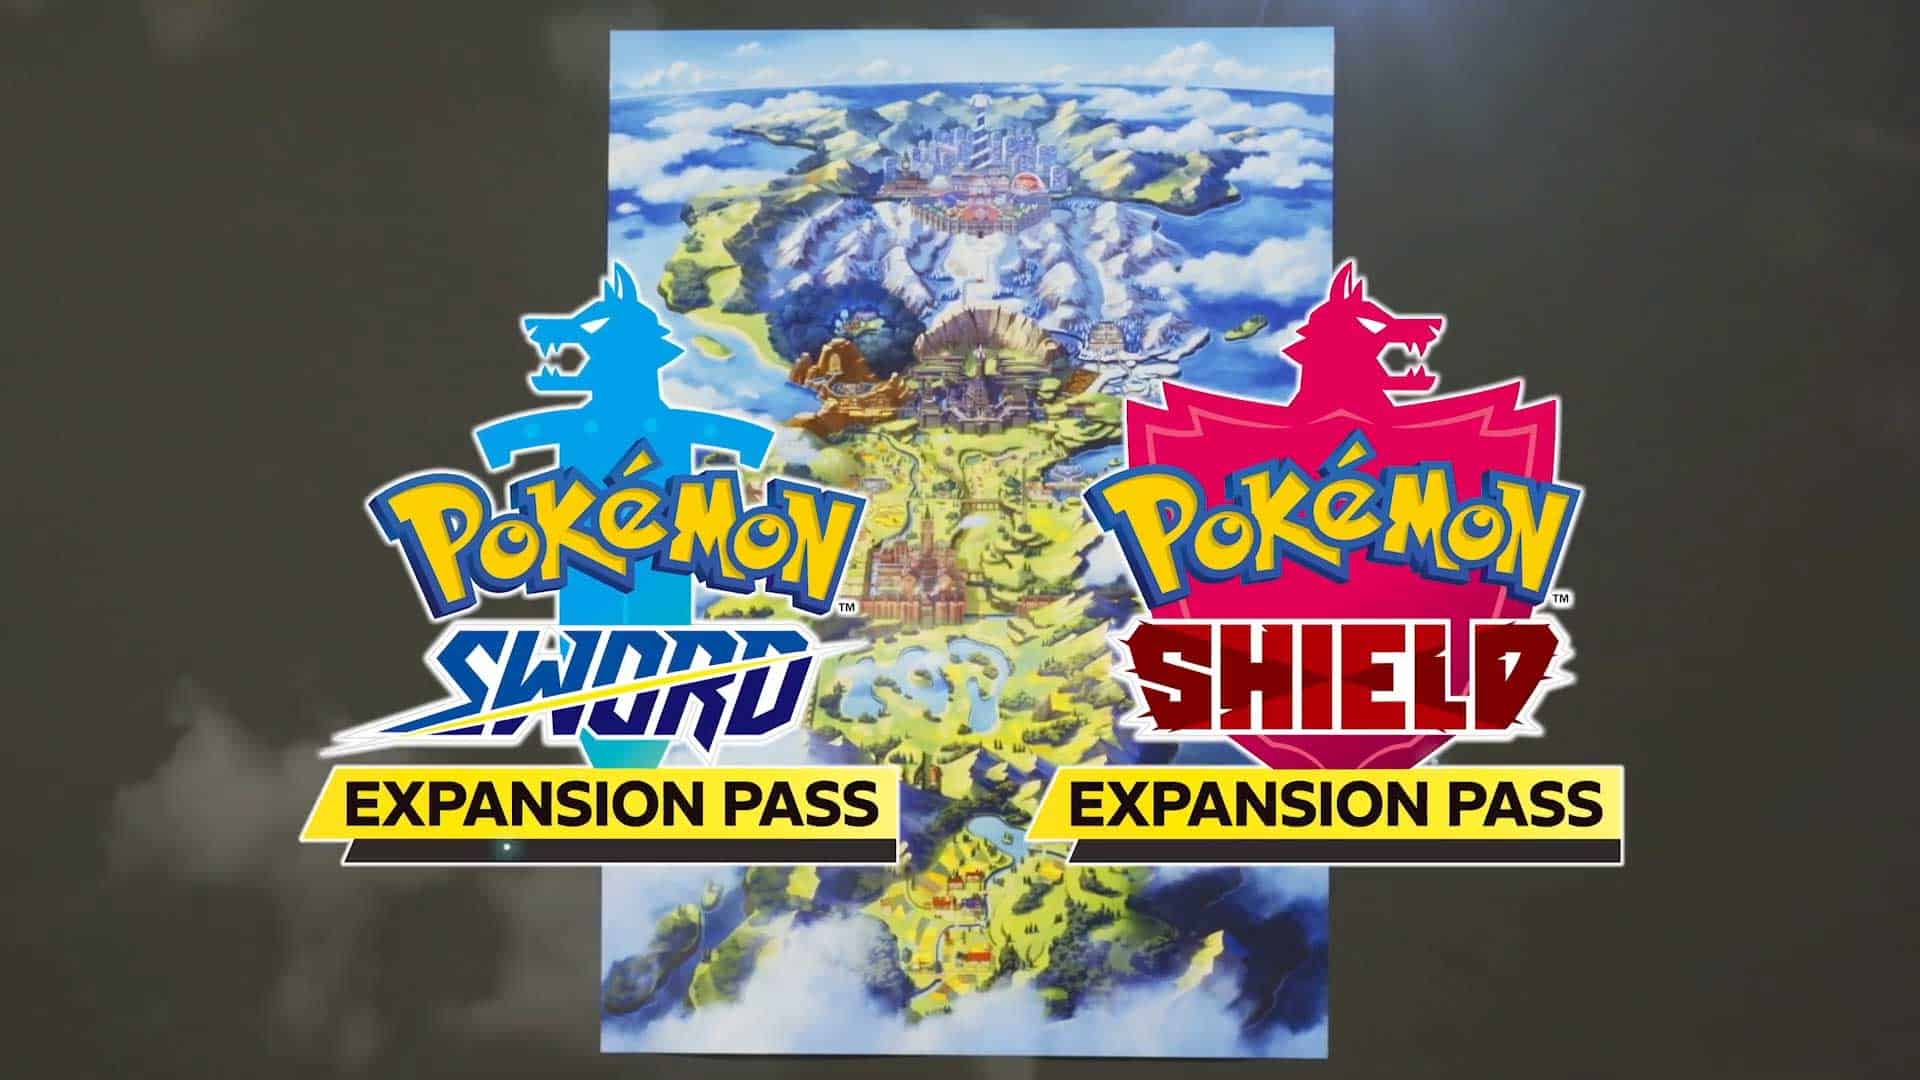 Pokemon Sword and Shield Expansion Pass Nintendo Switch